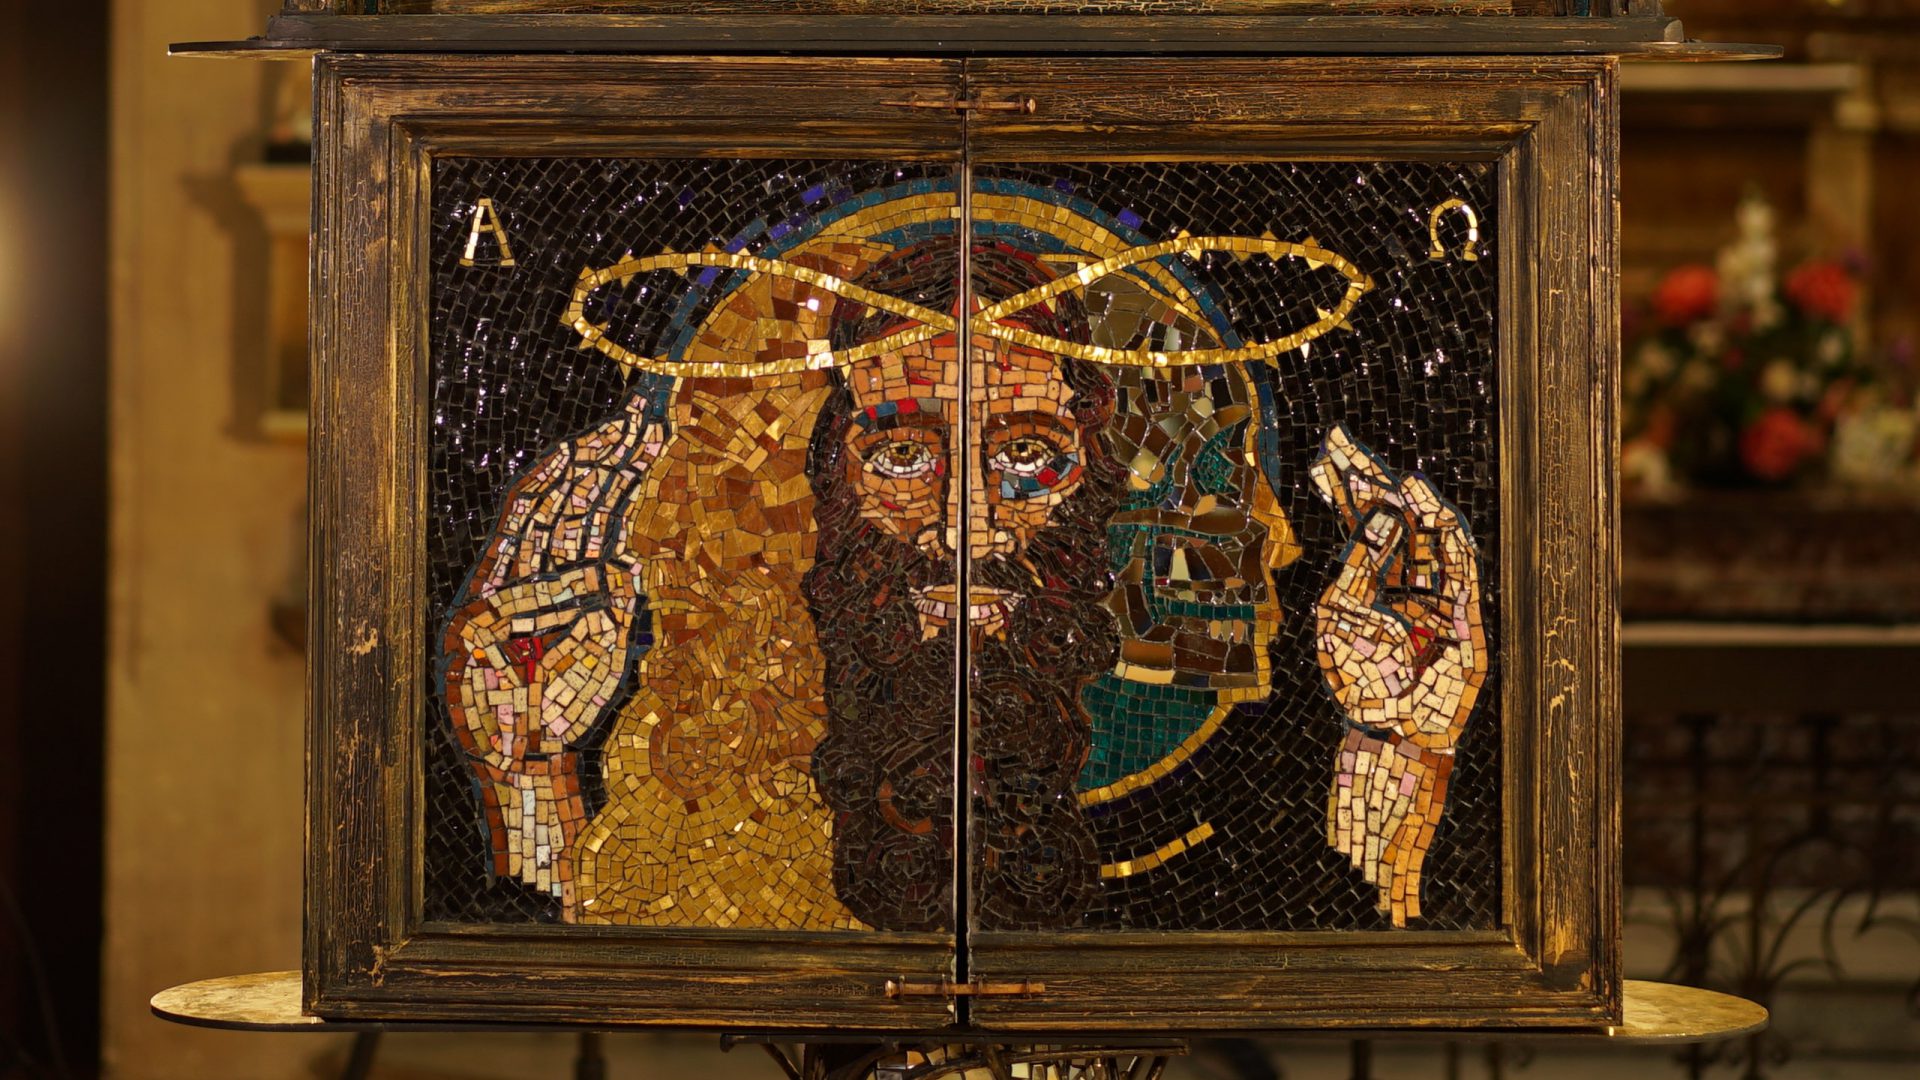 Jesus’ face is in the centre, and the doors open at the point of his mouth and lips so as he speaks, the doors open and vice versa. The doors close using nails reminiscent of his death. Jesus is not blue-eyed and western but dark, battered and bruised from the Passion and his skin reflects his true ethnicity from the Mediterranean. Jesus’ crown of thorns are made from the infinity symbol, for eternity. He is the eternal one with an eternal message, and this symbol also unites science and religion within God’s kingdom. Eternity is echoed too in the use of the gold Alpha and Omega symbols in the top left and right corners – the two Greek letters for the beginning and the end of the alphabet as God is the beginning and the end of all creation. The Holy Spirit appears in a number of forms in this artwork but here on the right within the Trinity first as glass and mirror, to help us understand how the Holy Spirit reflects God and Christ and we find ourselves in God by looking in the mirror of the Holy Spirit. The Holy Spirit is also conveyed here with open hands around the central Trinity but with the stigmata in them to represent the nails in Christ’s hands when crucified. God is depicted as 24 carat gold on the left side – with different types of gold to express his perfect totality as only the best will do for God.